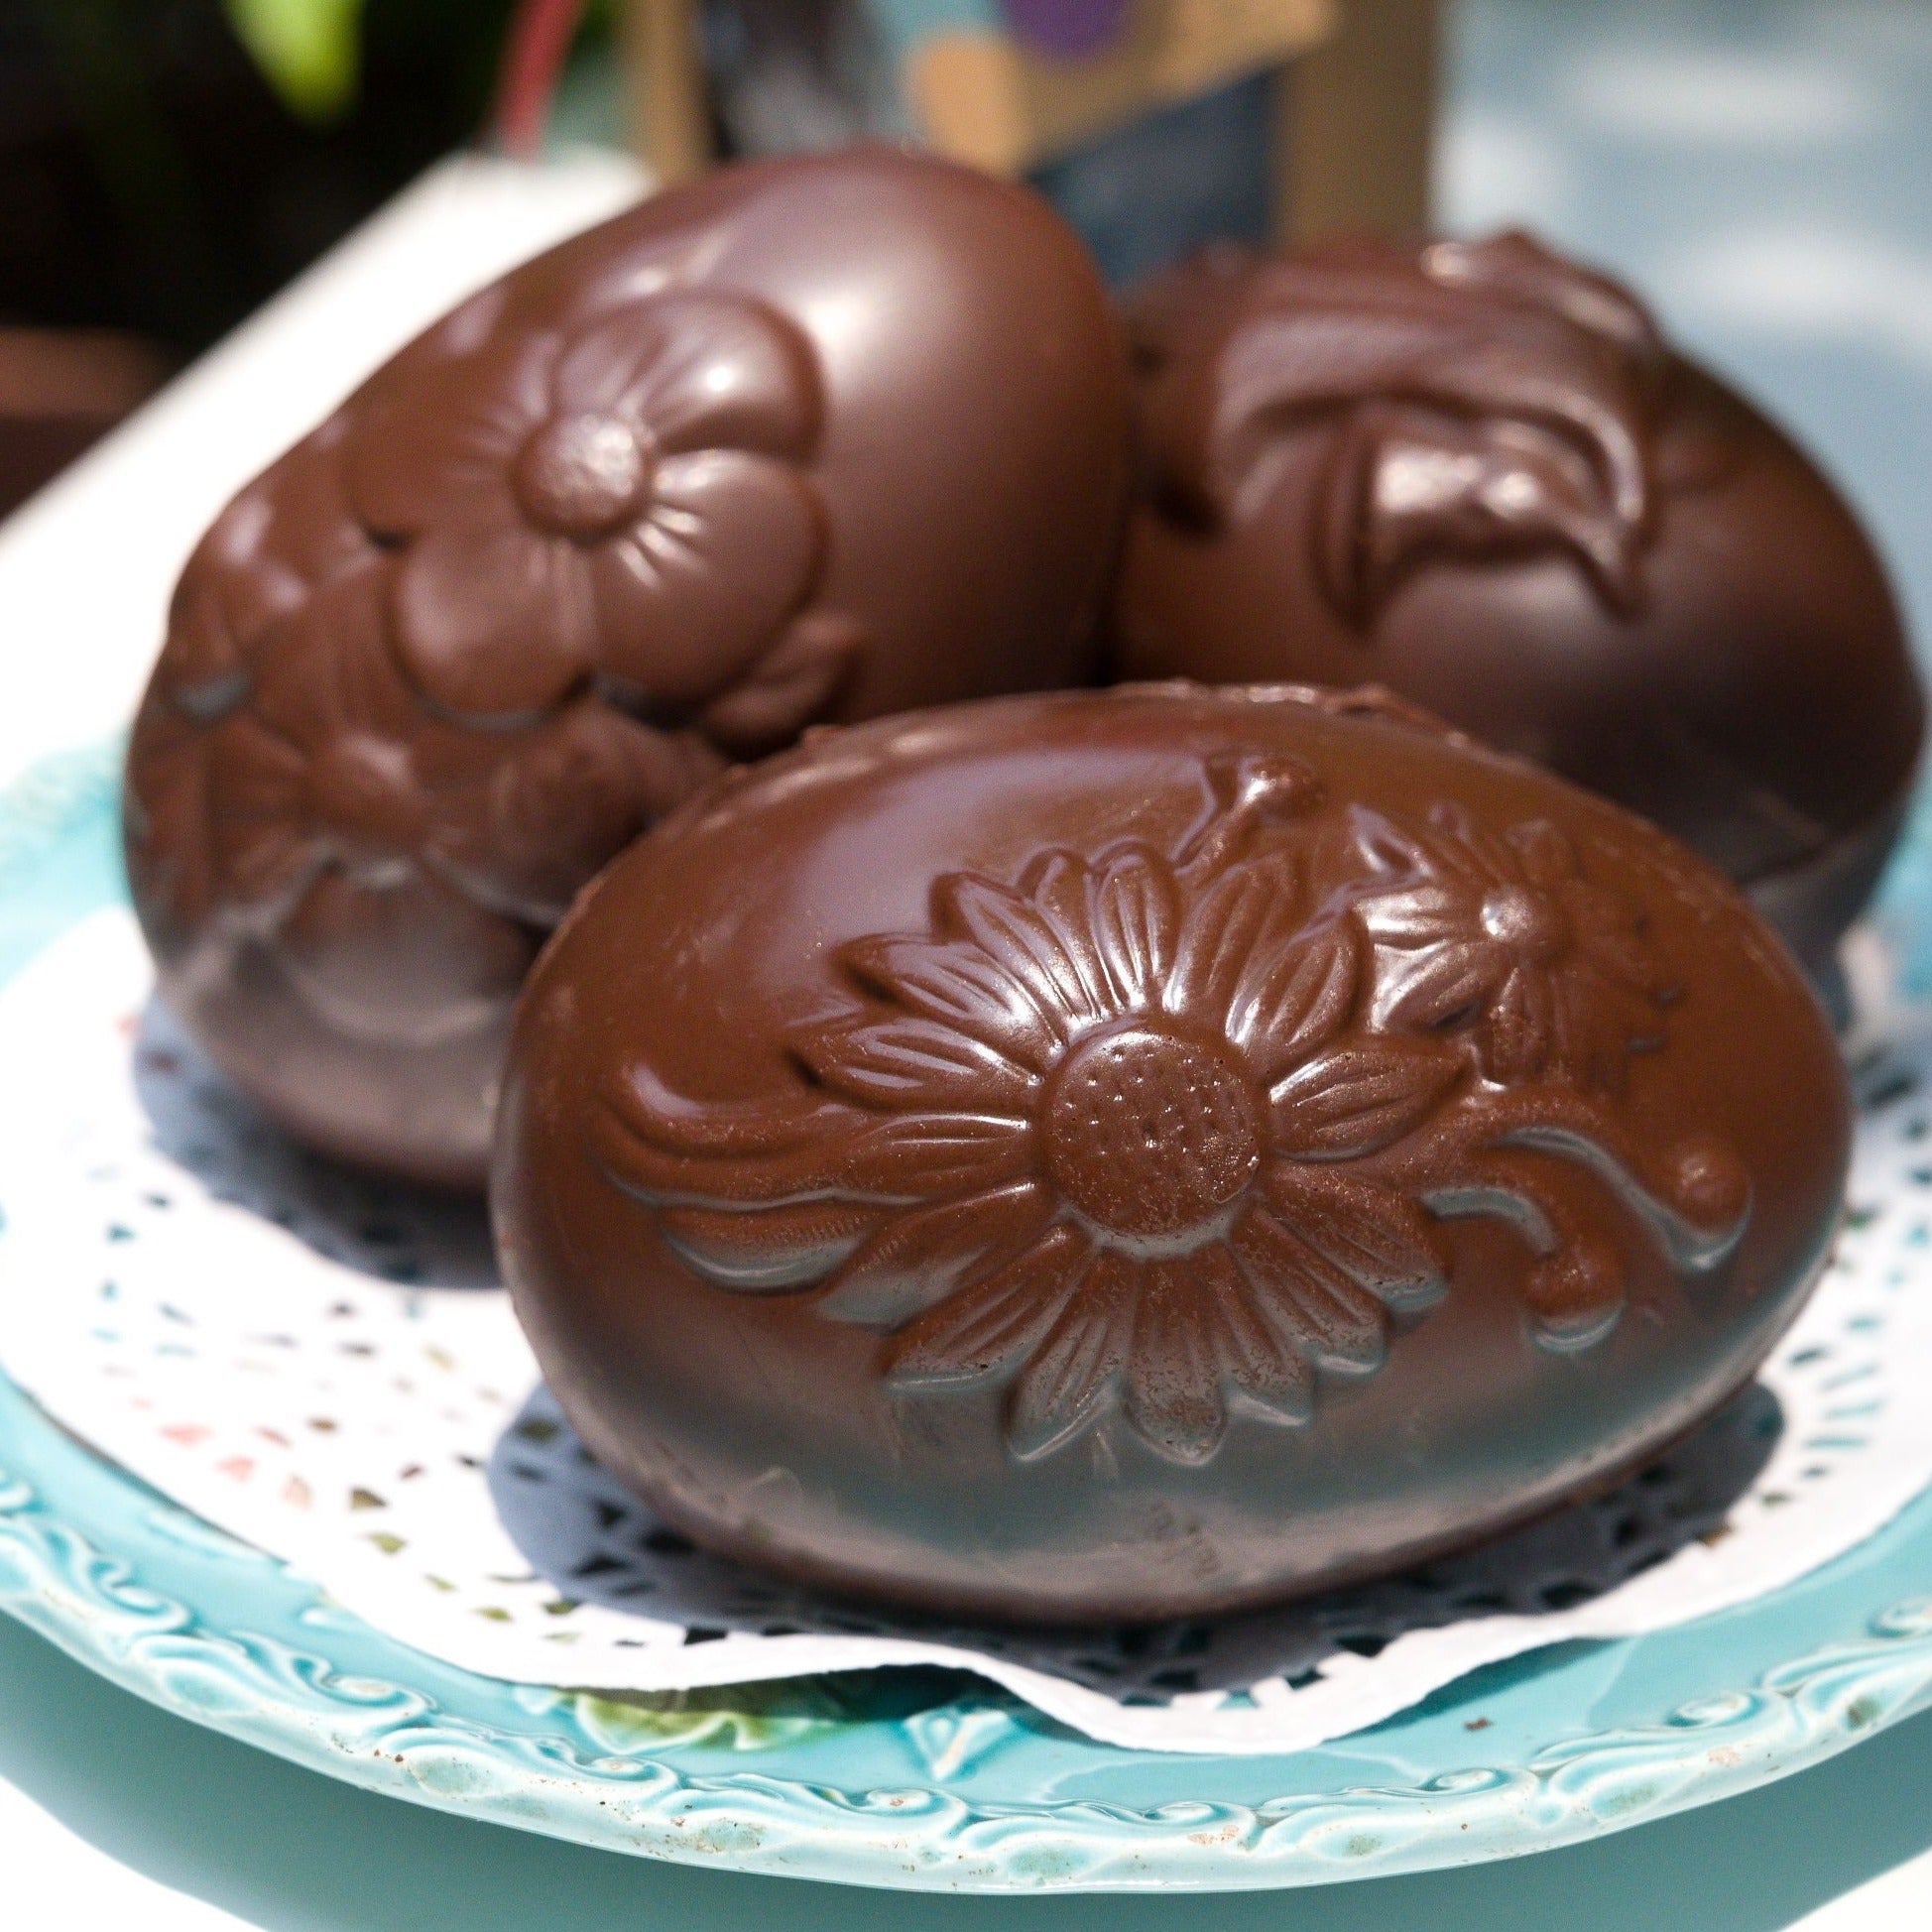 Chocolate Easter Egg filled with Chocolate Almond Eggs